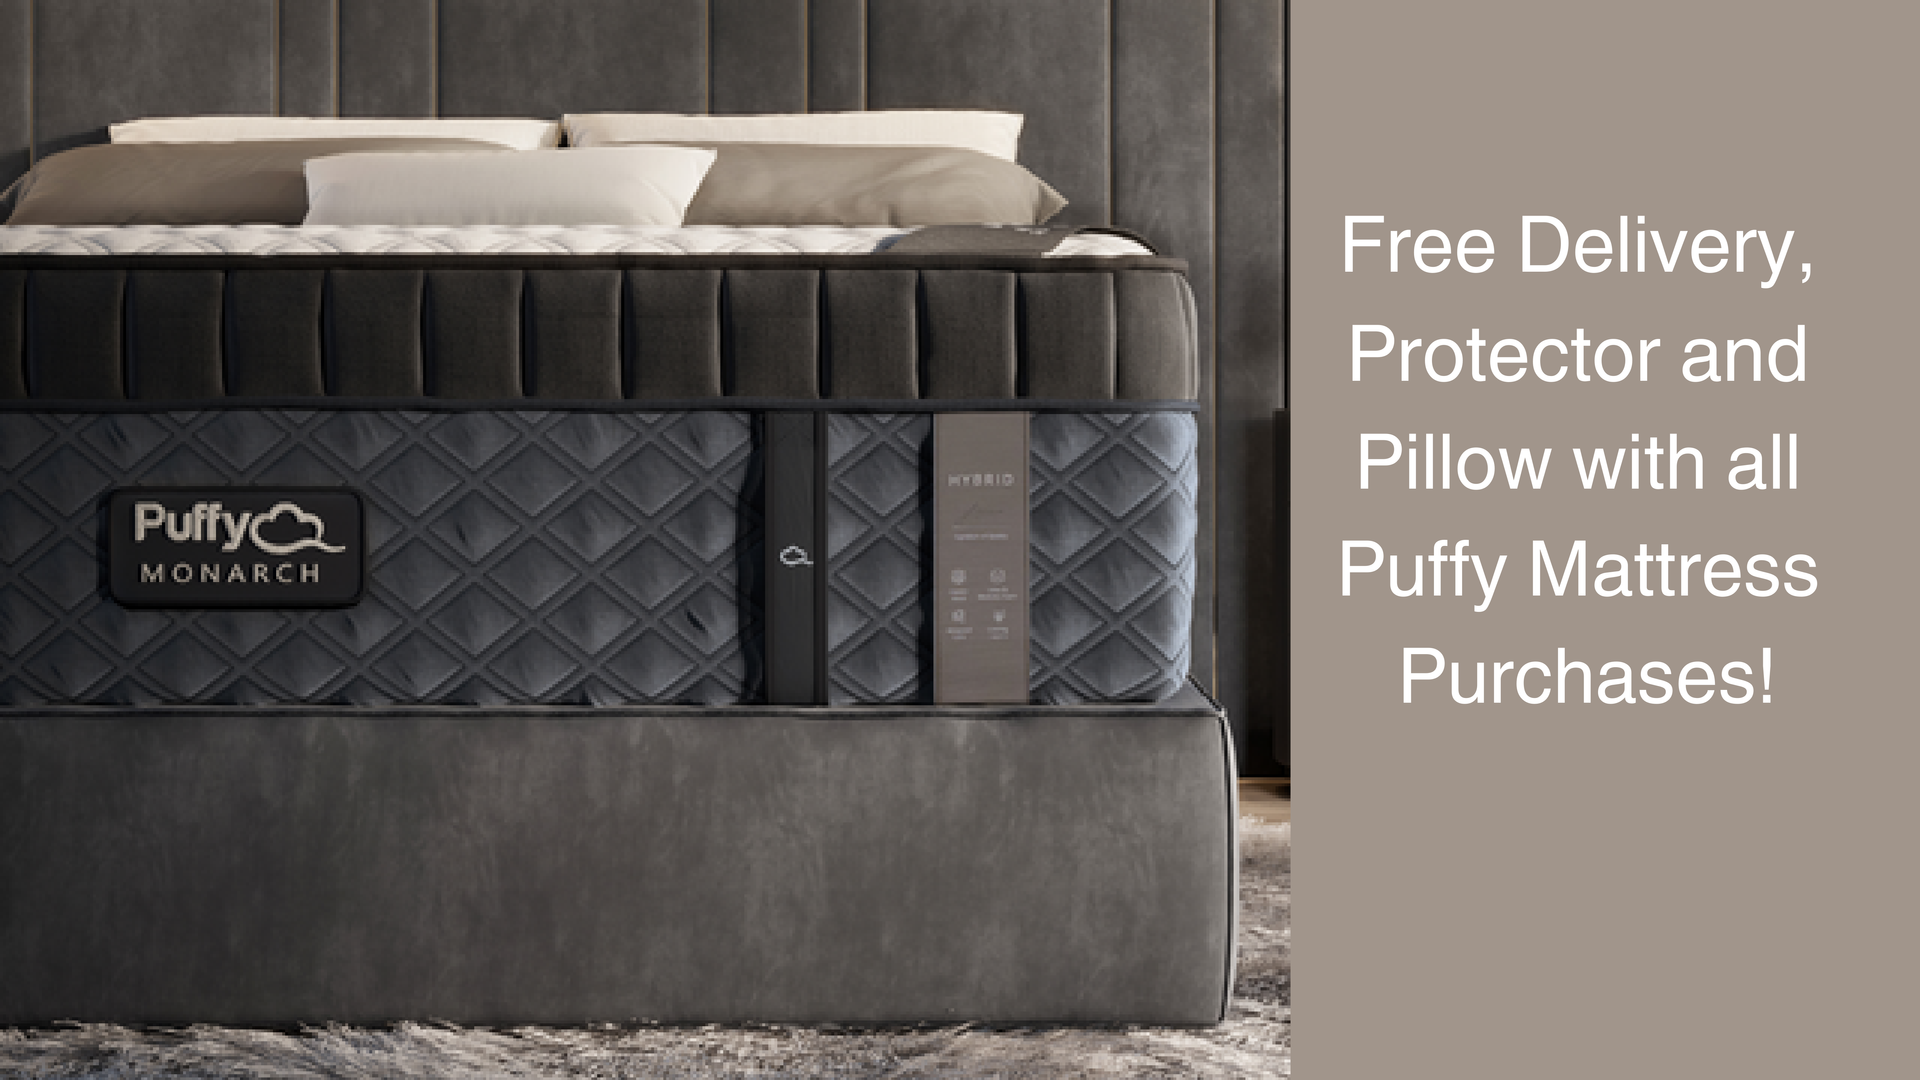 Free Delivery, Protector, and Pillow with all Puffy Mattress Purchases Flyer